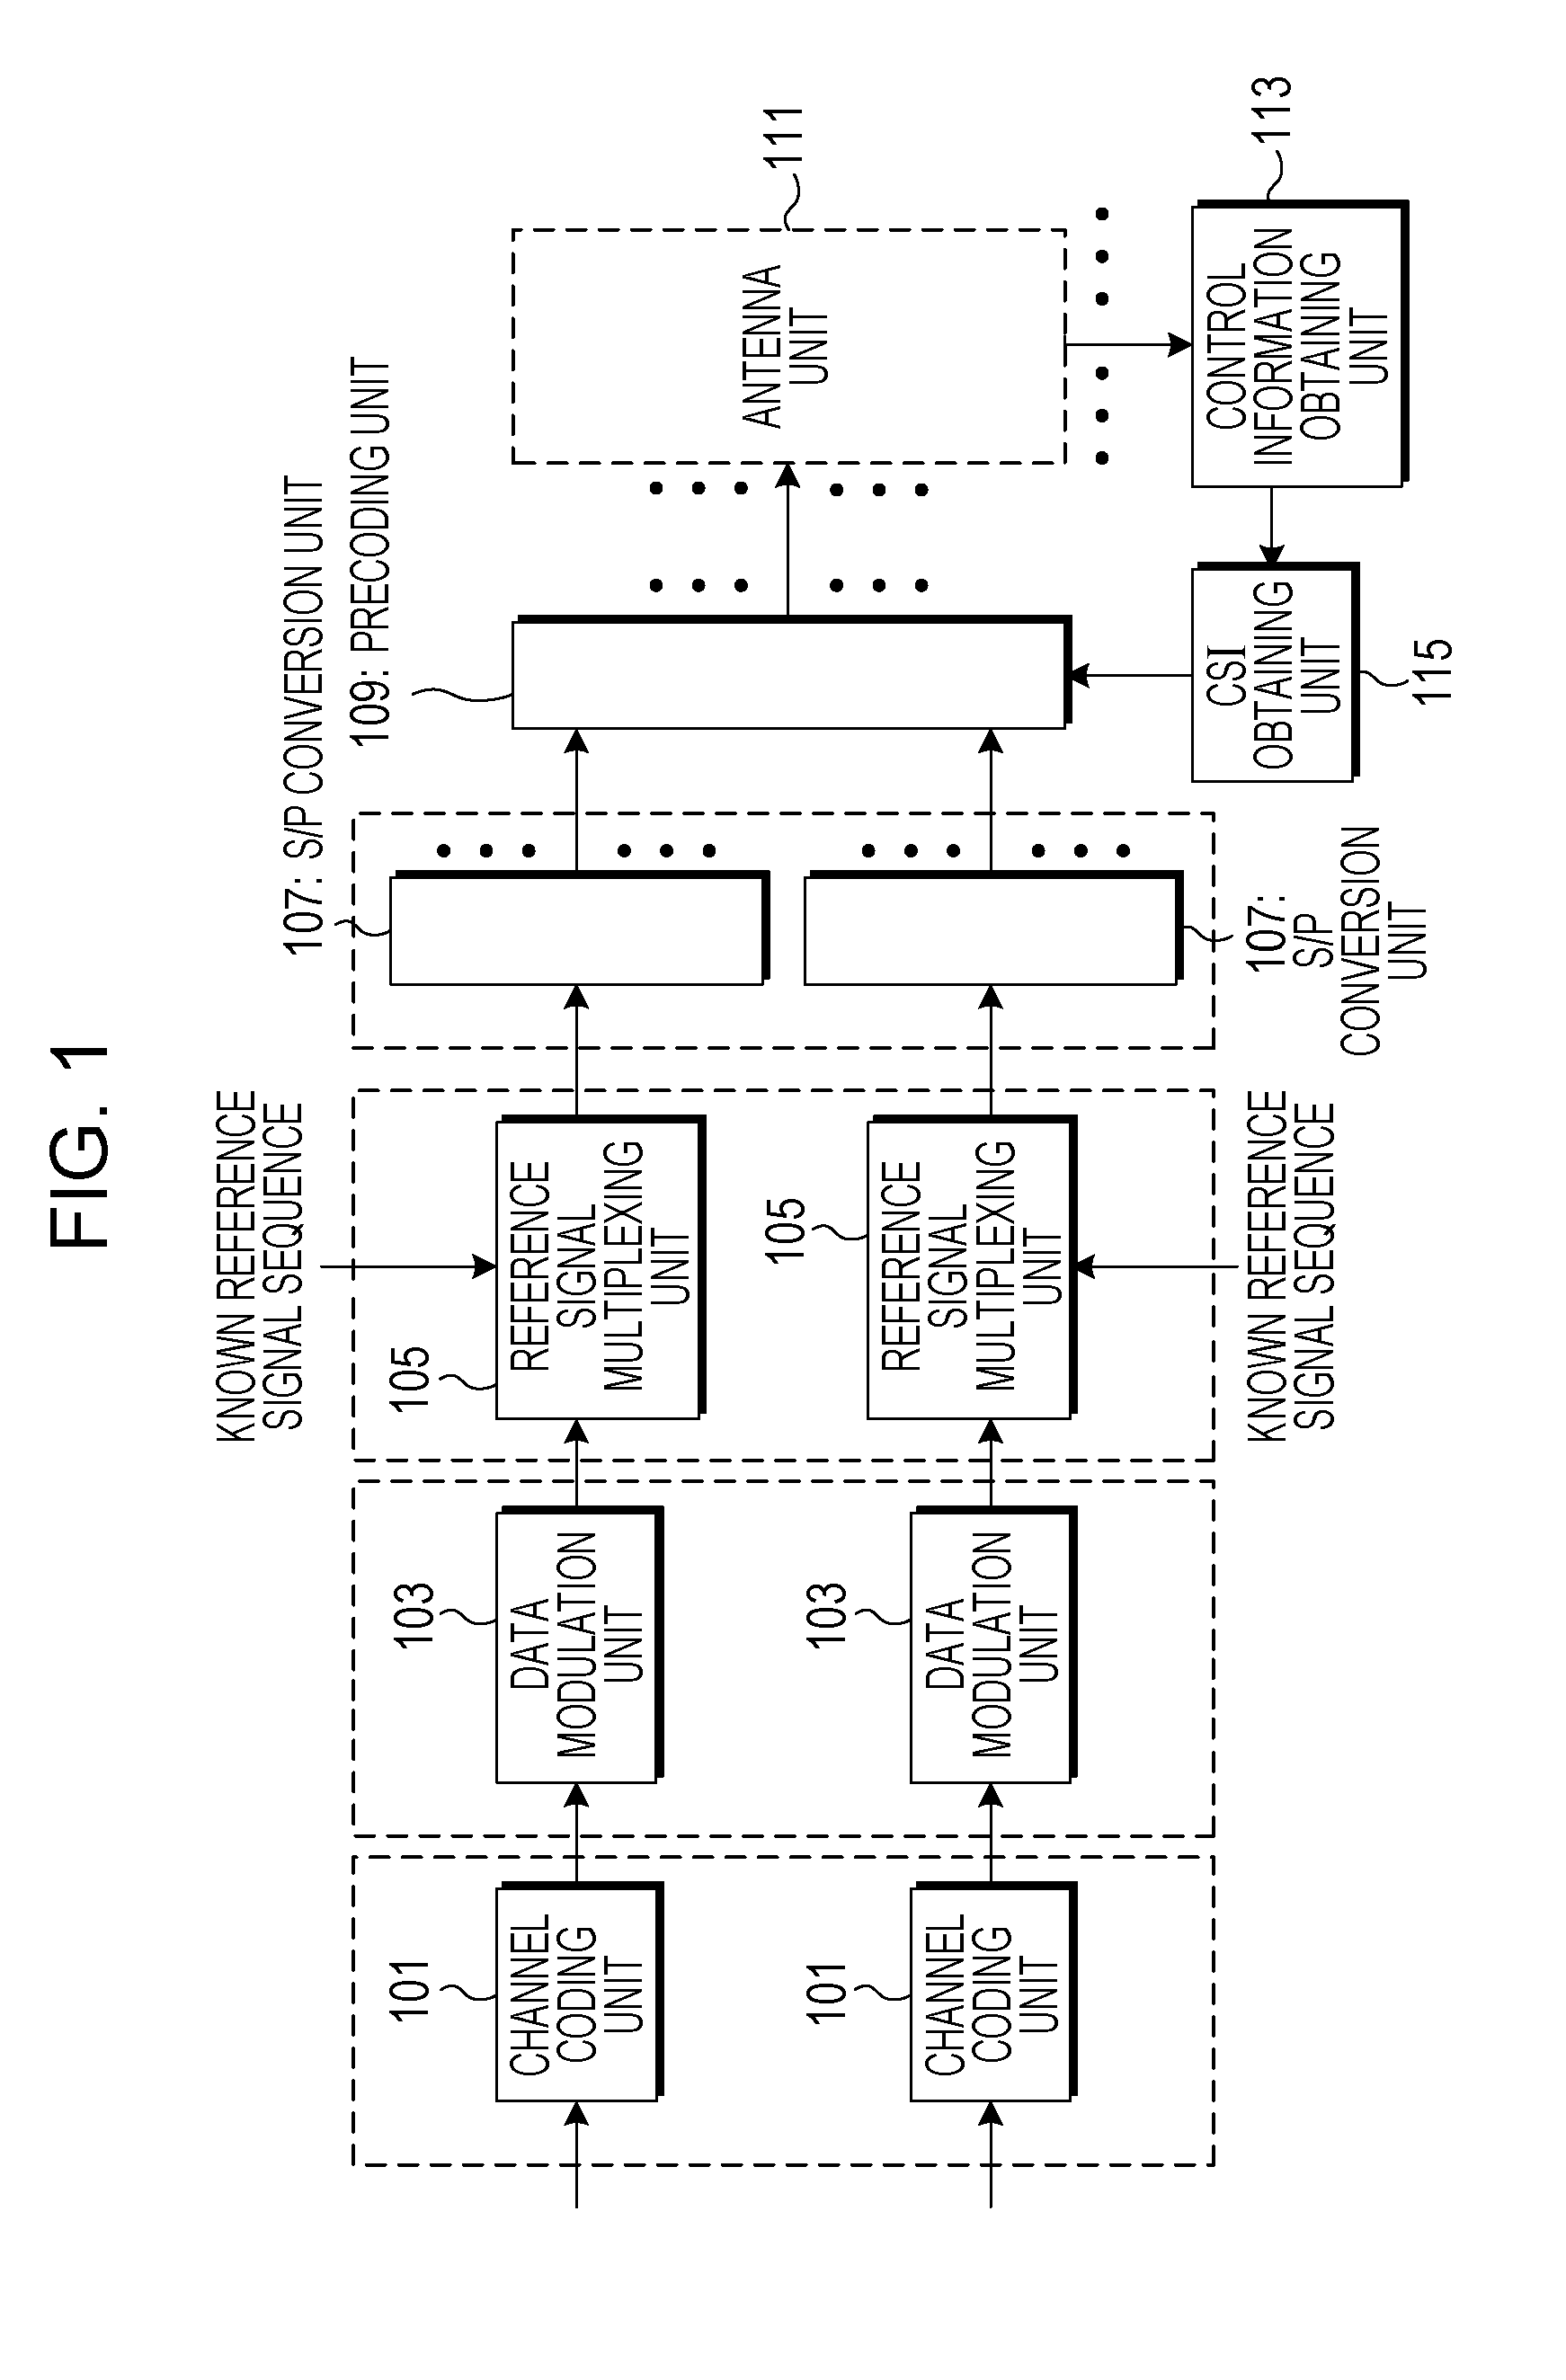 Precoding apparatus, program for precoding, and integrated circuit